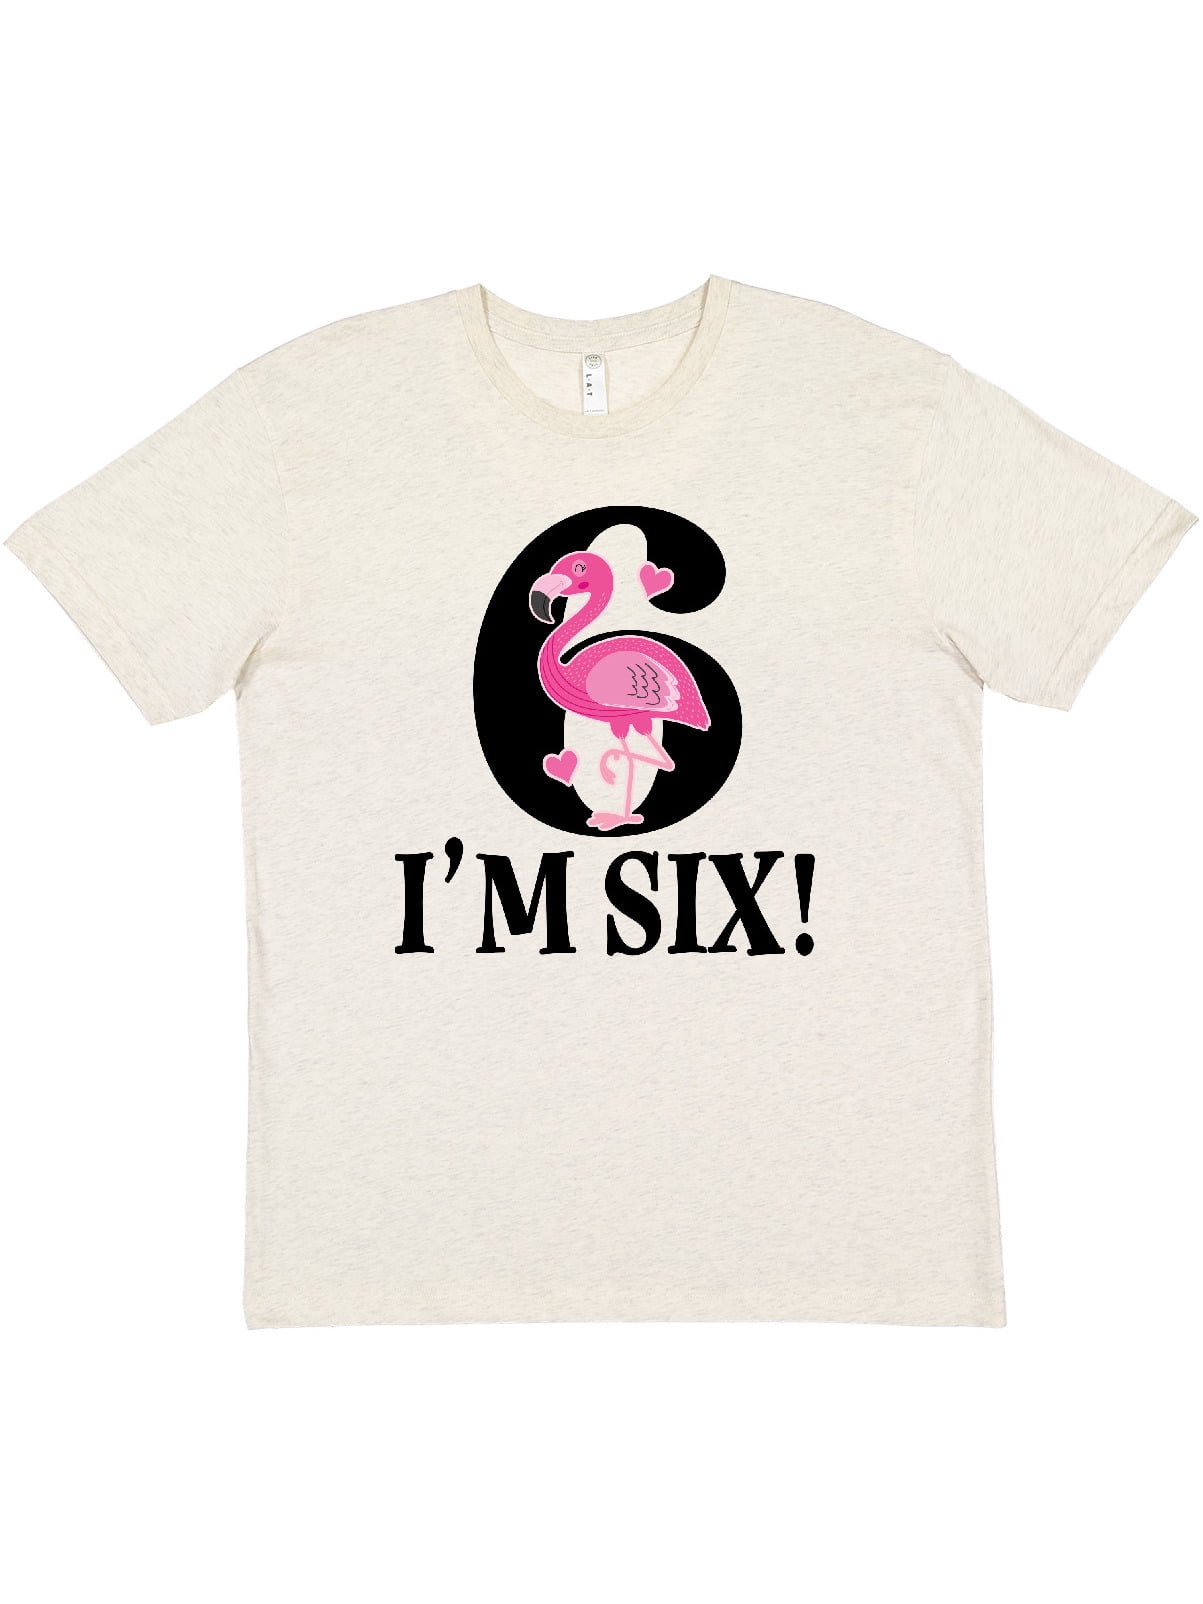 Flamingo 6th Birthday Gift for Six Year old Youth Kids Sweatshirt 6 year old